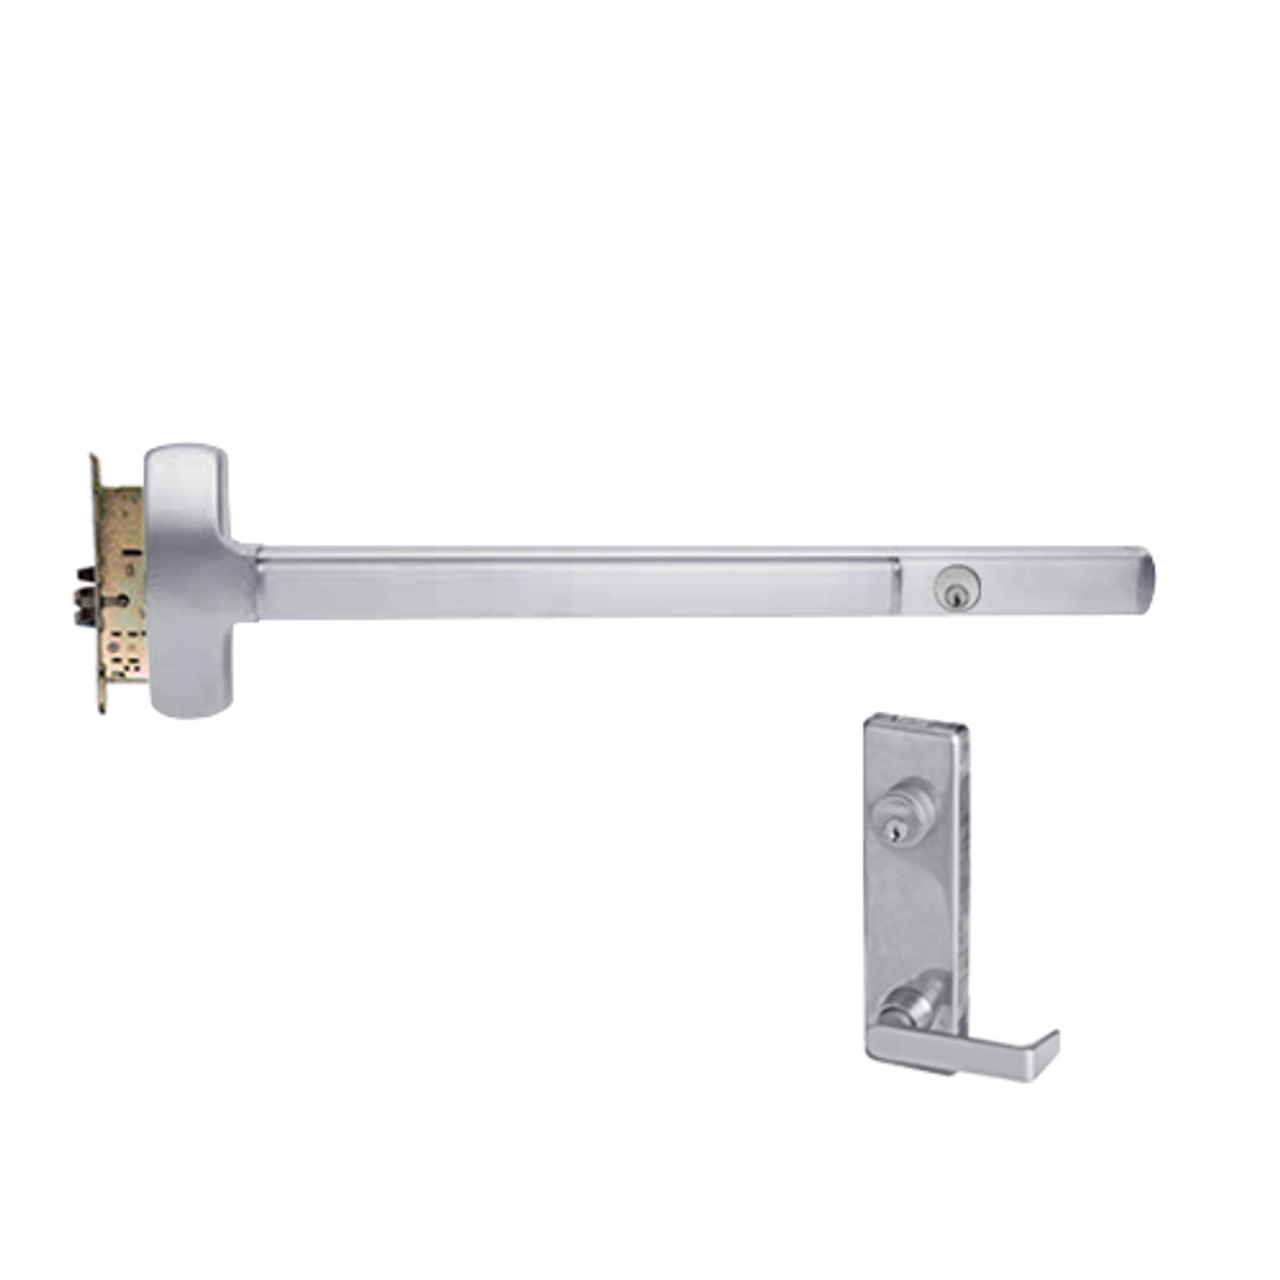 CD25-M-L-NL-DANE-US32-4-RHR Falcon Exit Device in Polished Stainless Steel